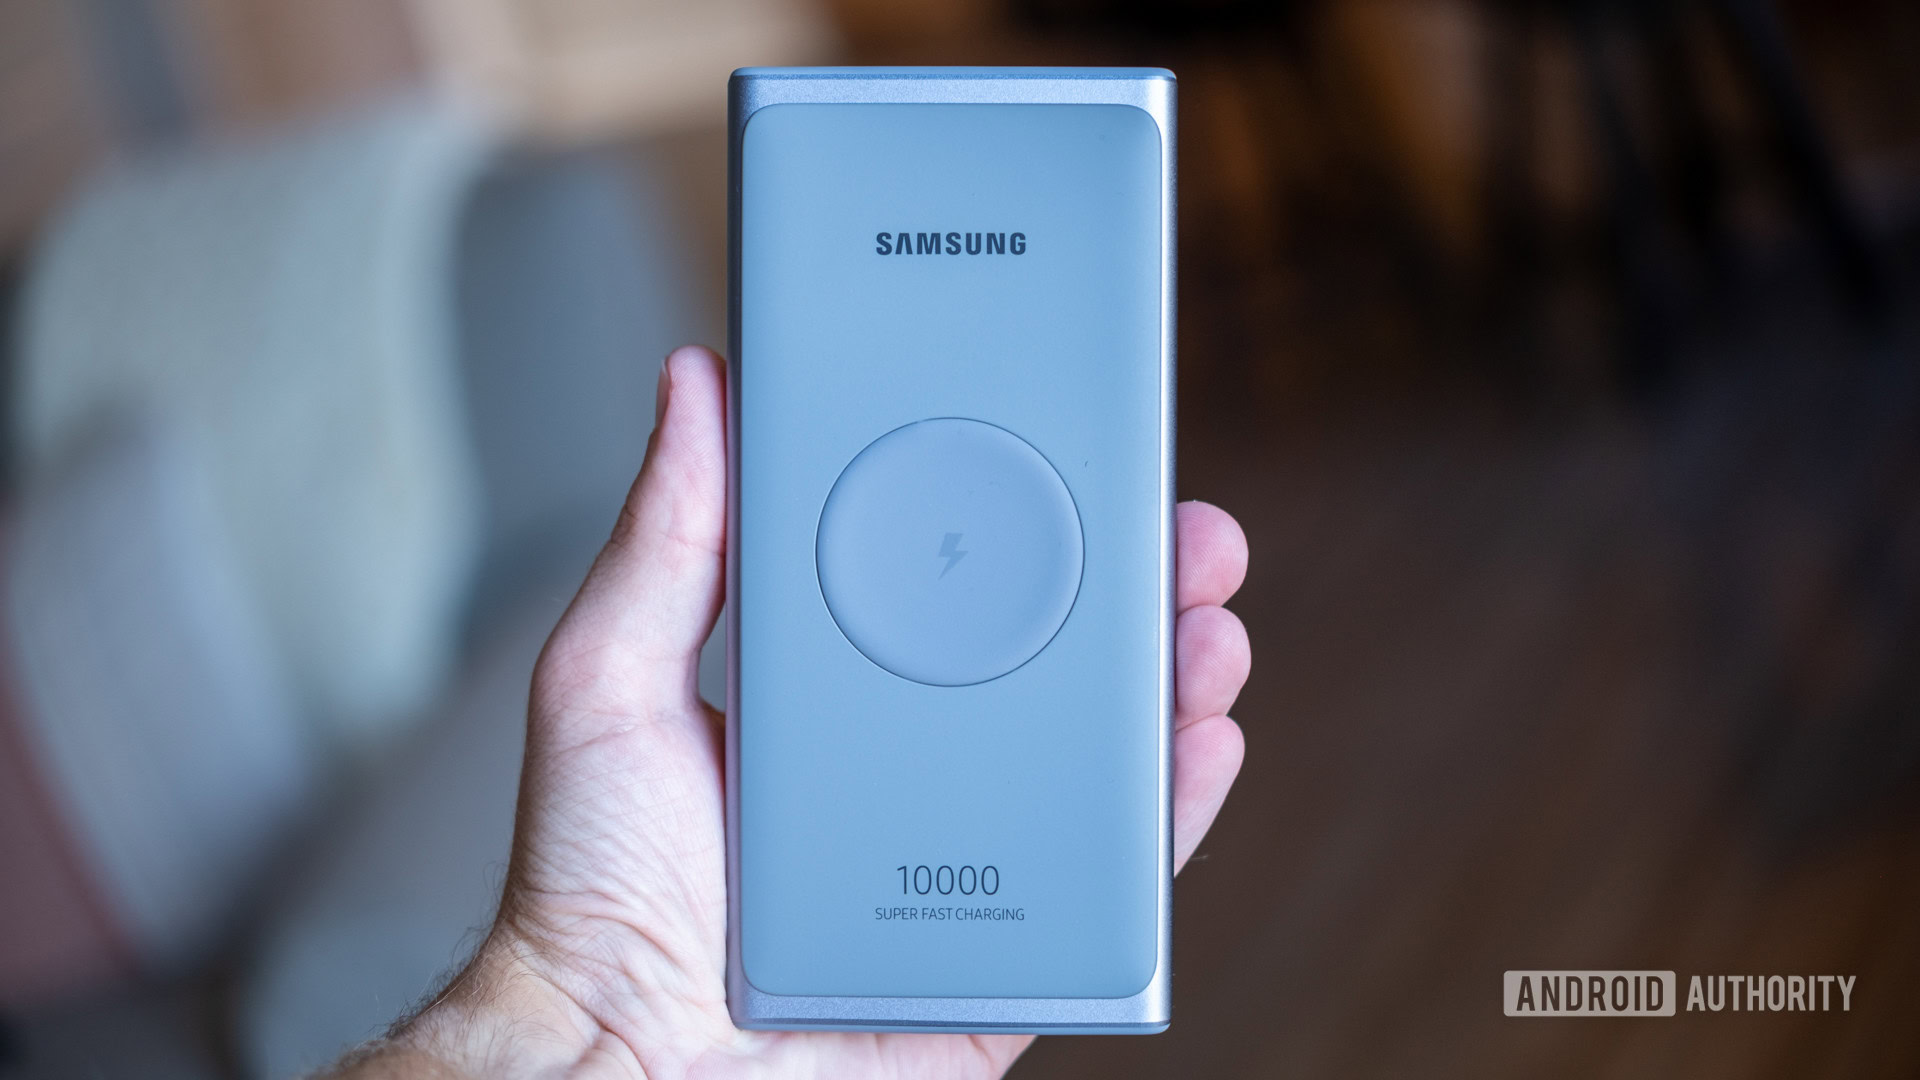 dwaas plank Kinderen Samsung 25W Wireless Portable Battery review: The need for speed